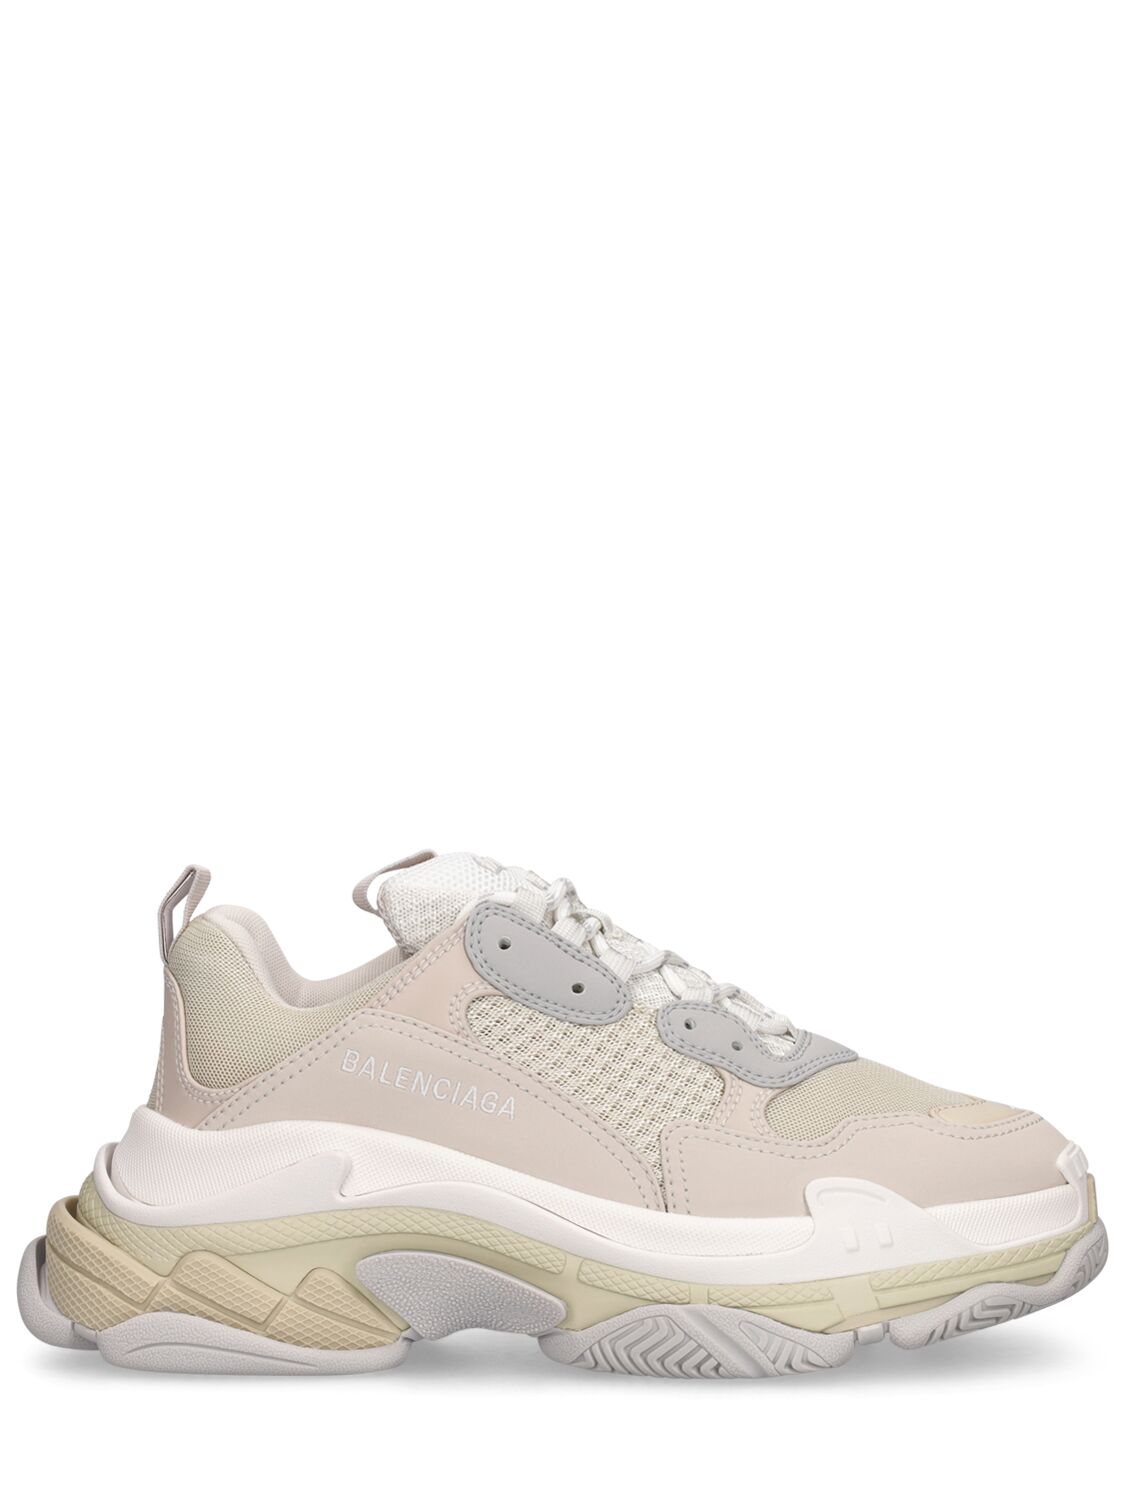 Balenciaga 60mm Triple S Faux Leather Sneakers In Eggshell,white